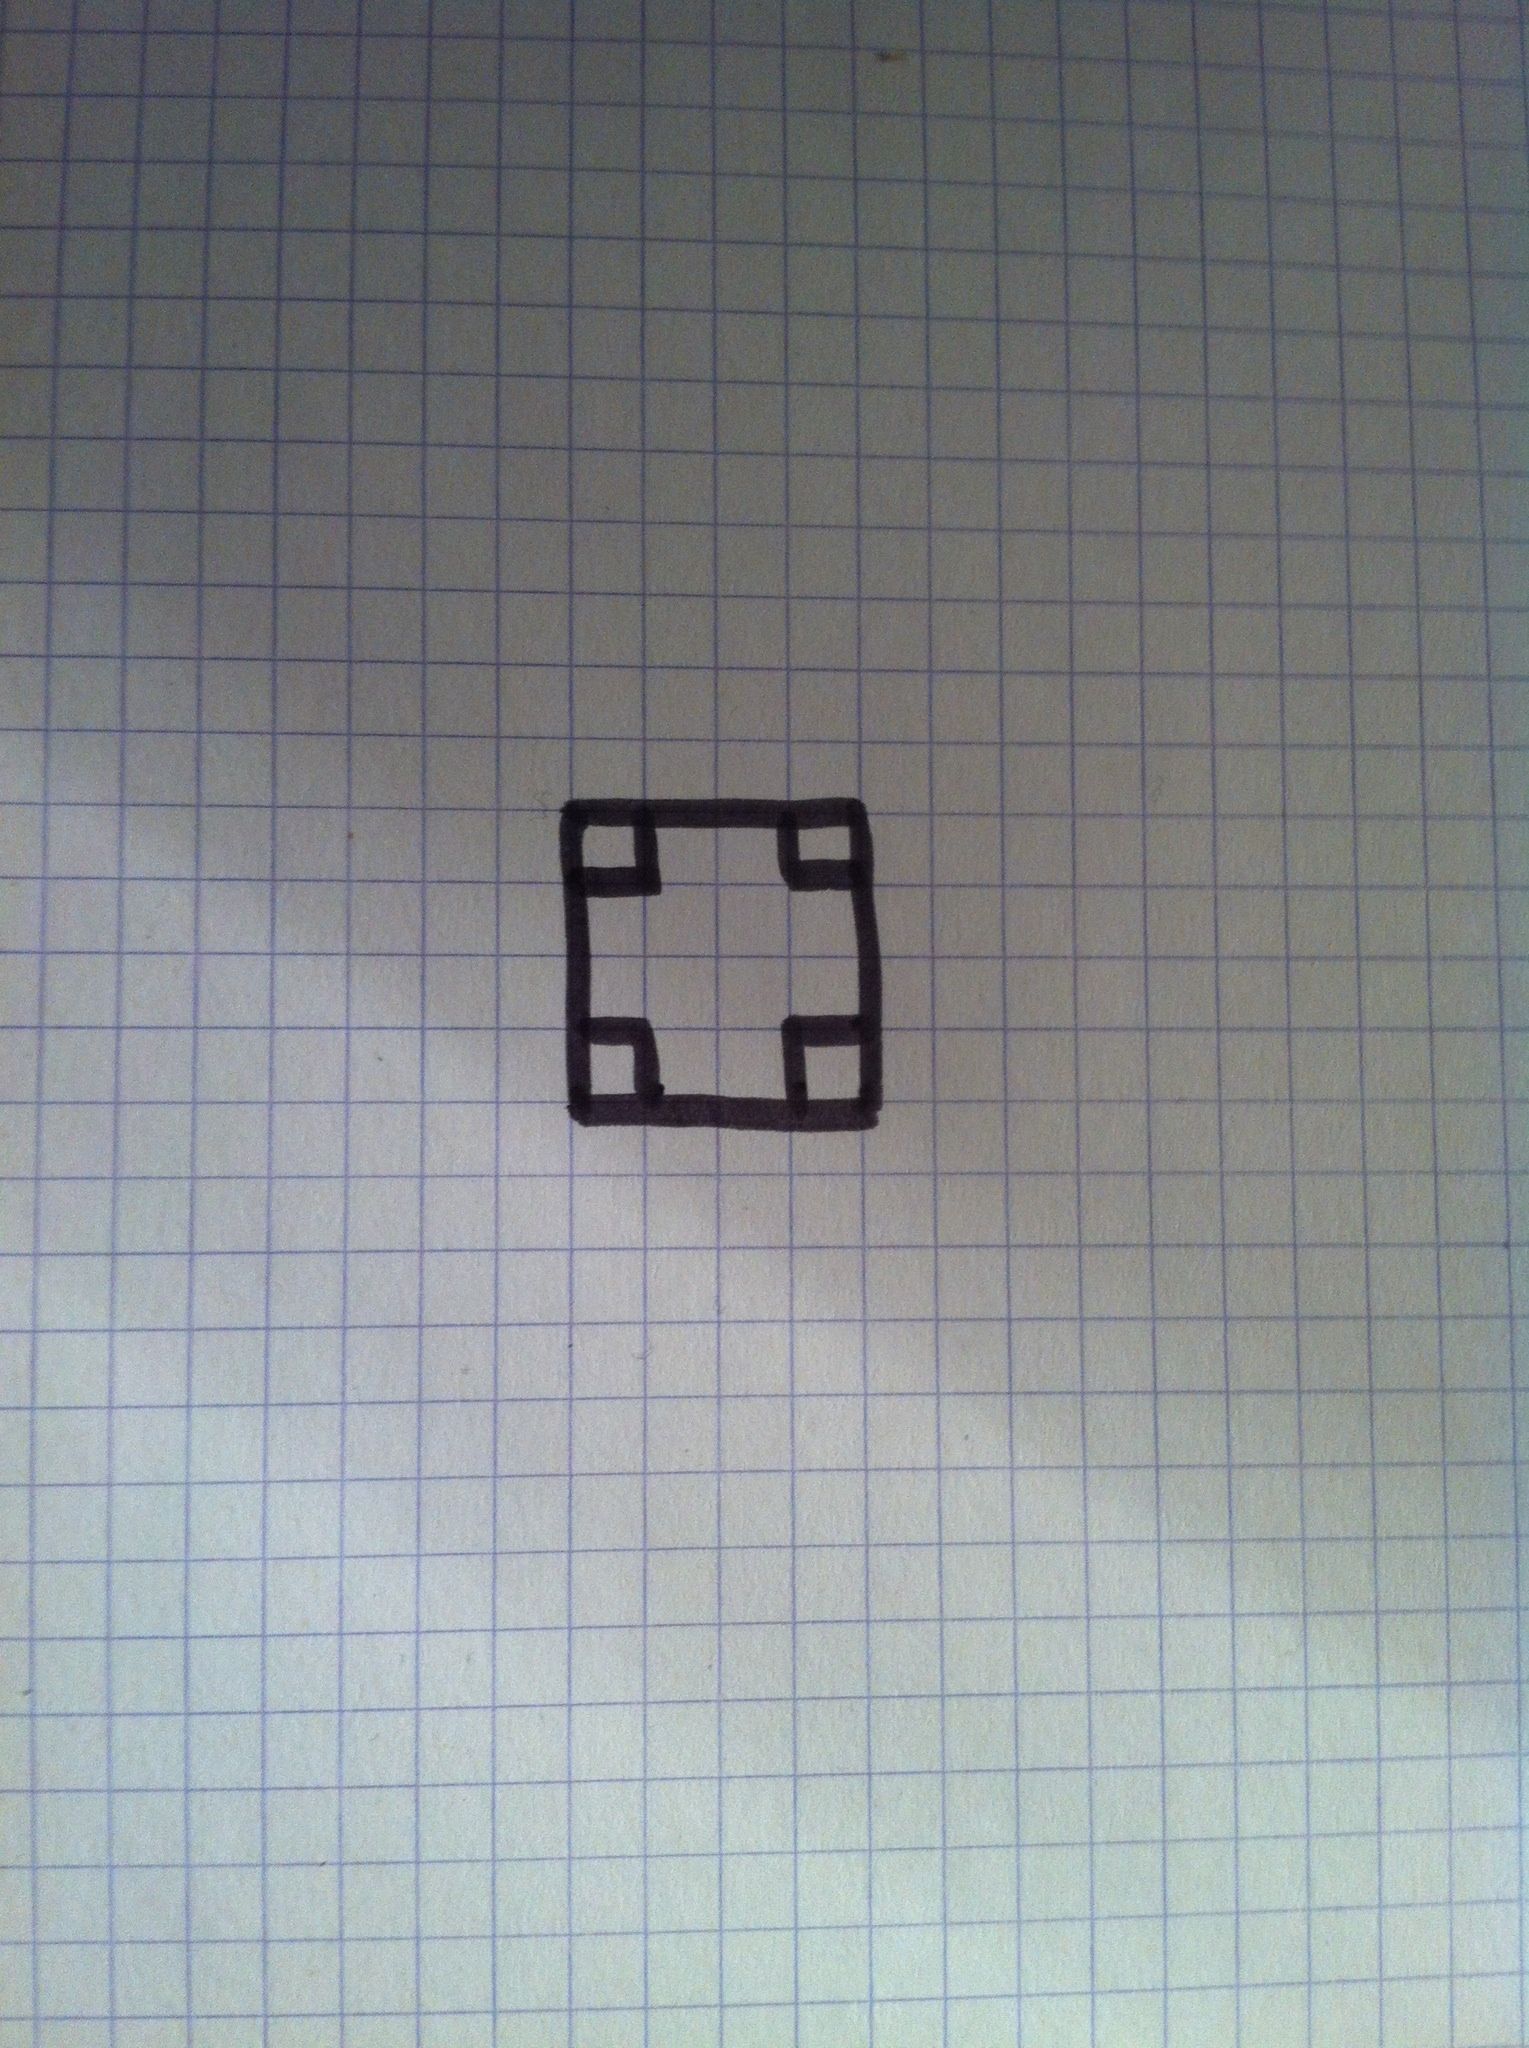 draw a colored in square gimpshop